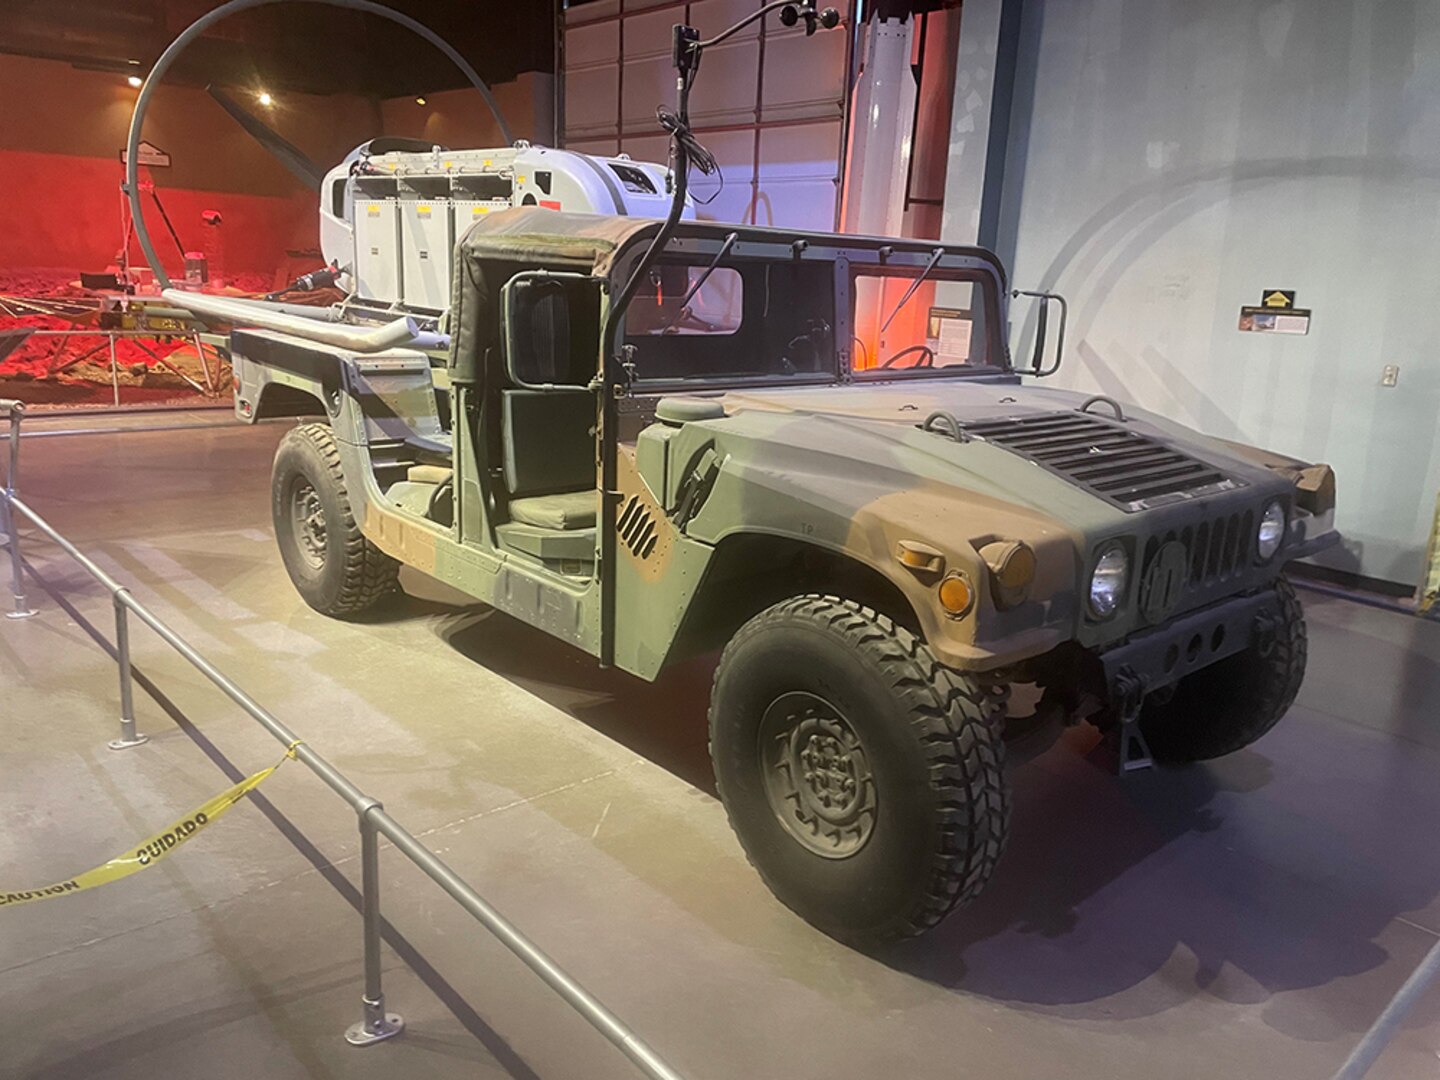 A Humvee is displayed in a museum.